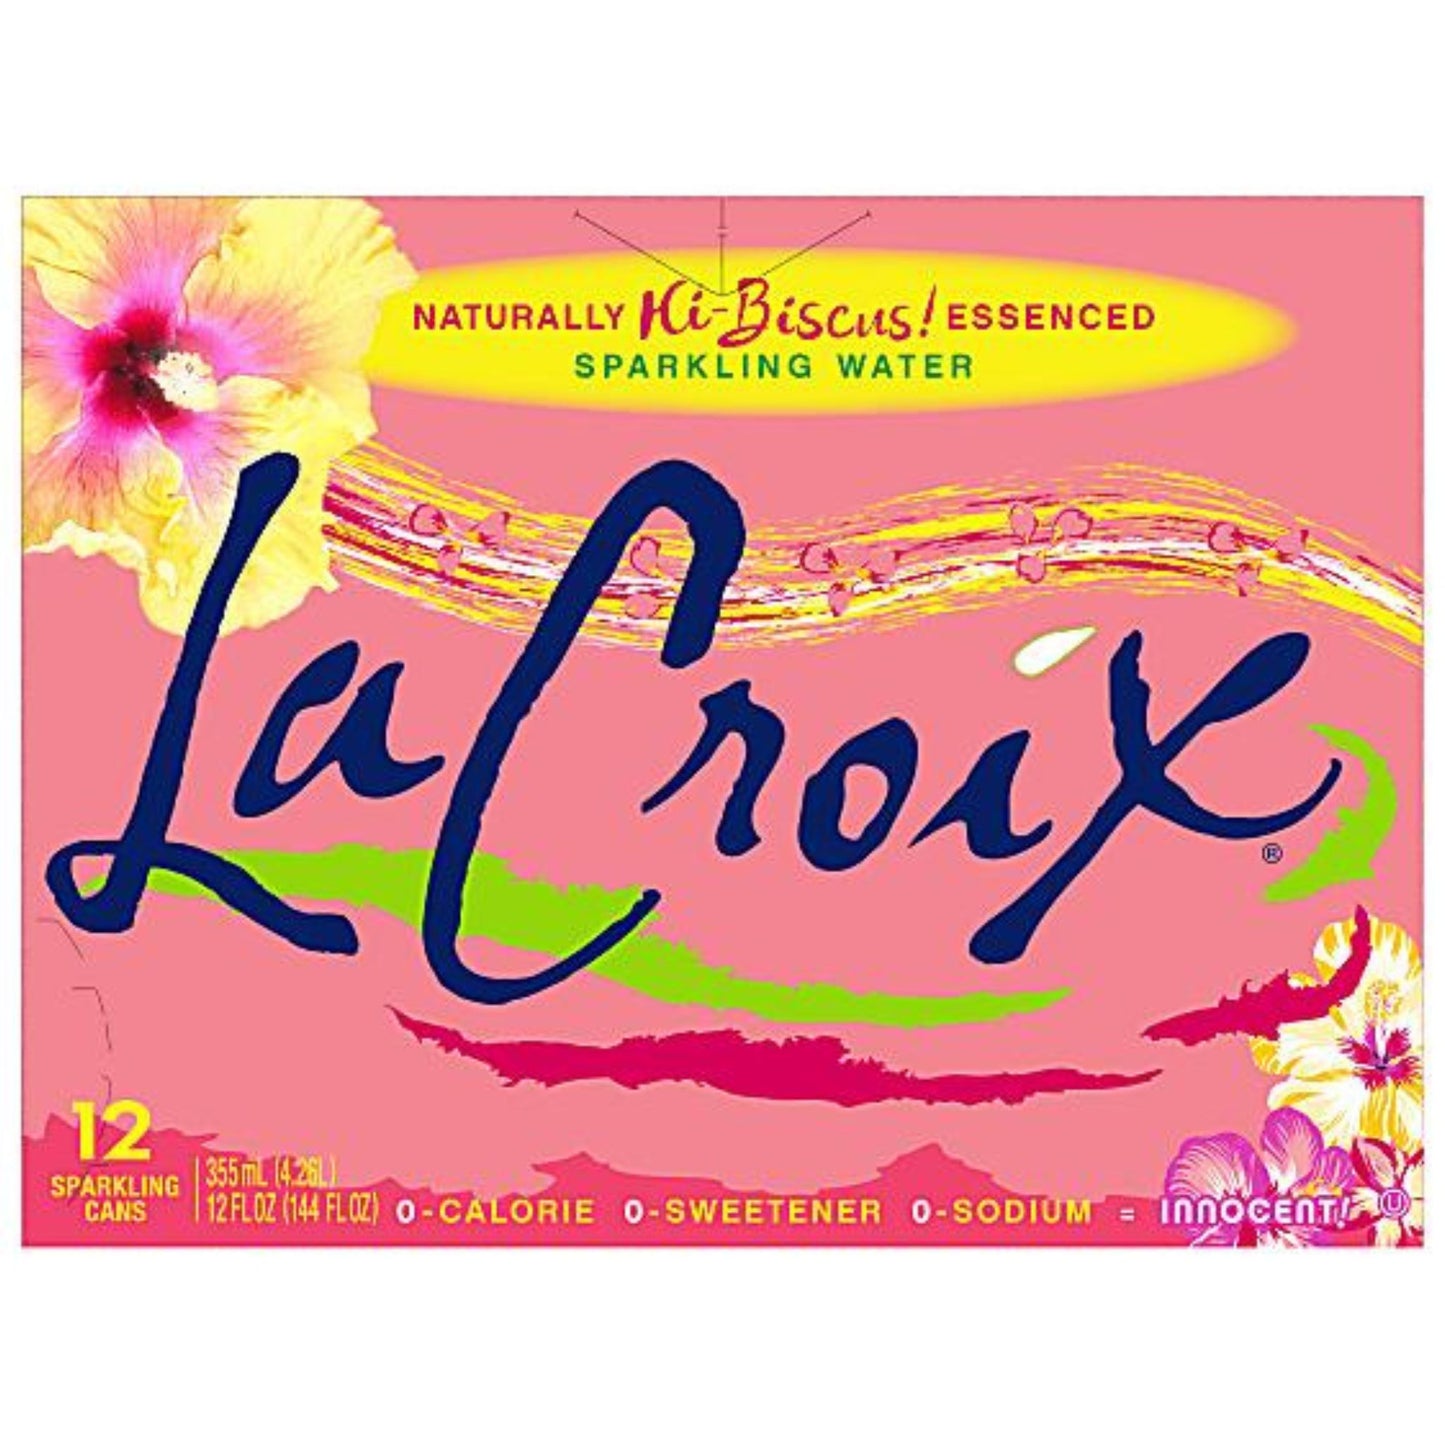 LaCroix Sparkling Water 12 Oz. HIbiscus 24 Cans Per Pack, Case Of 2 Packs